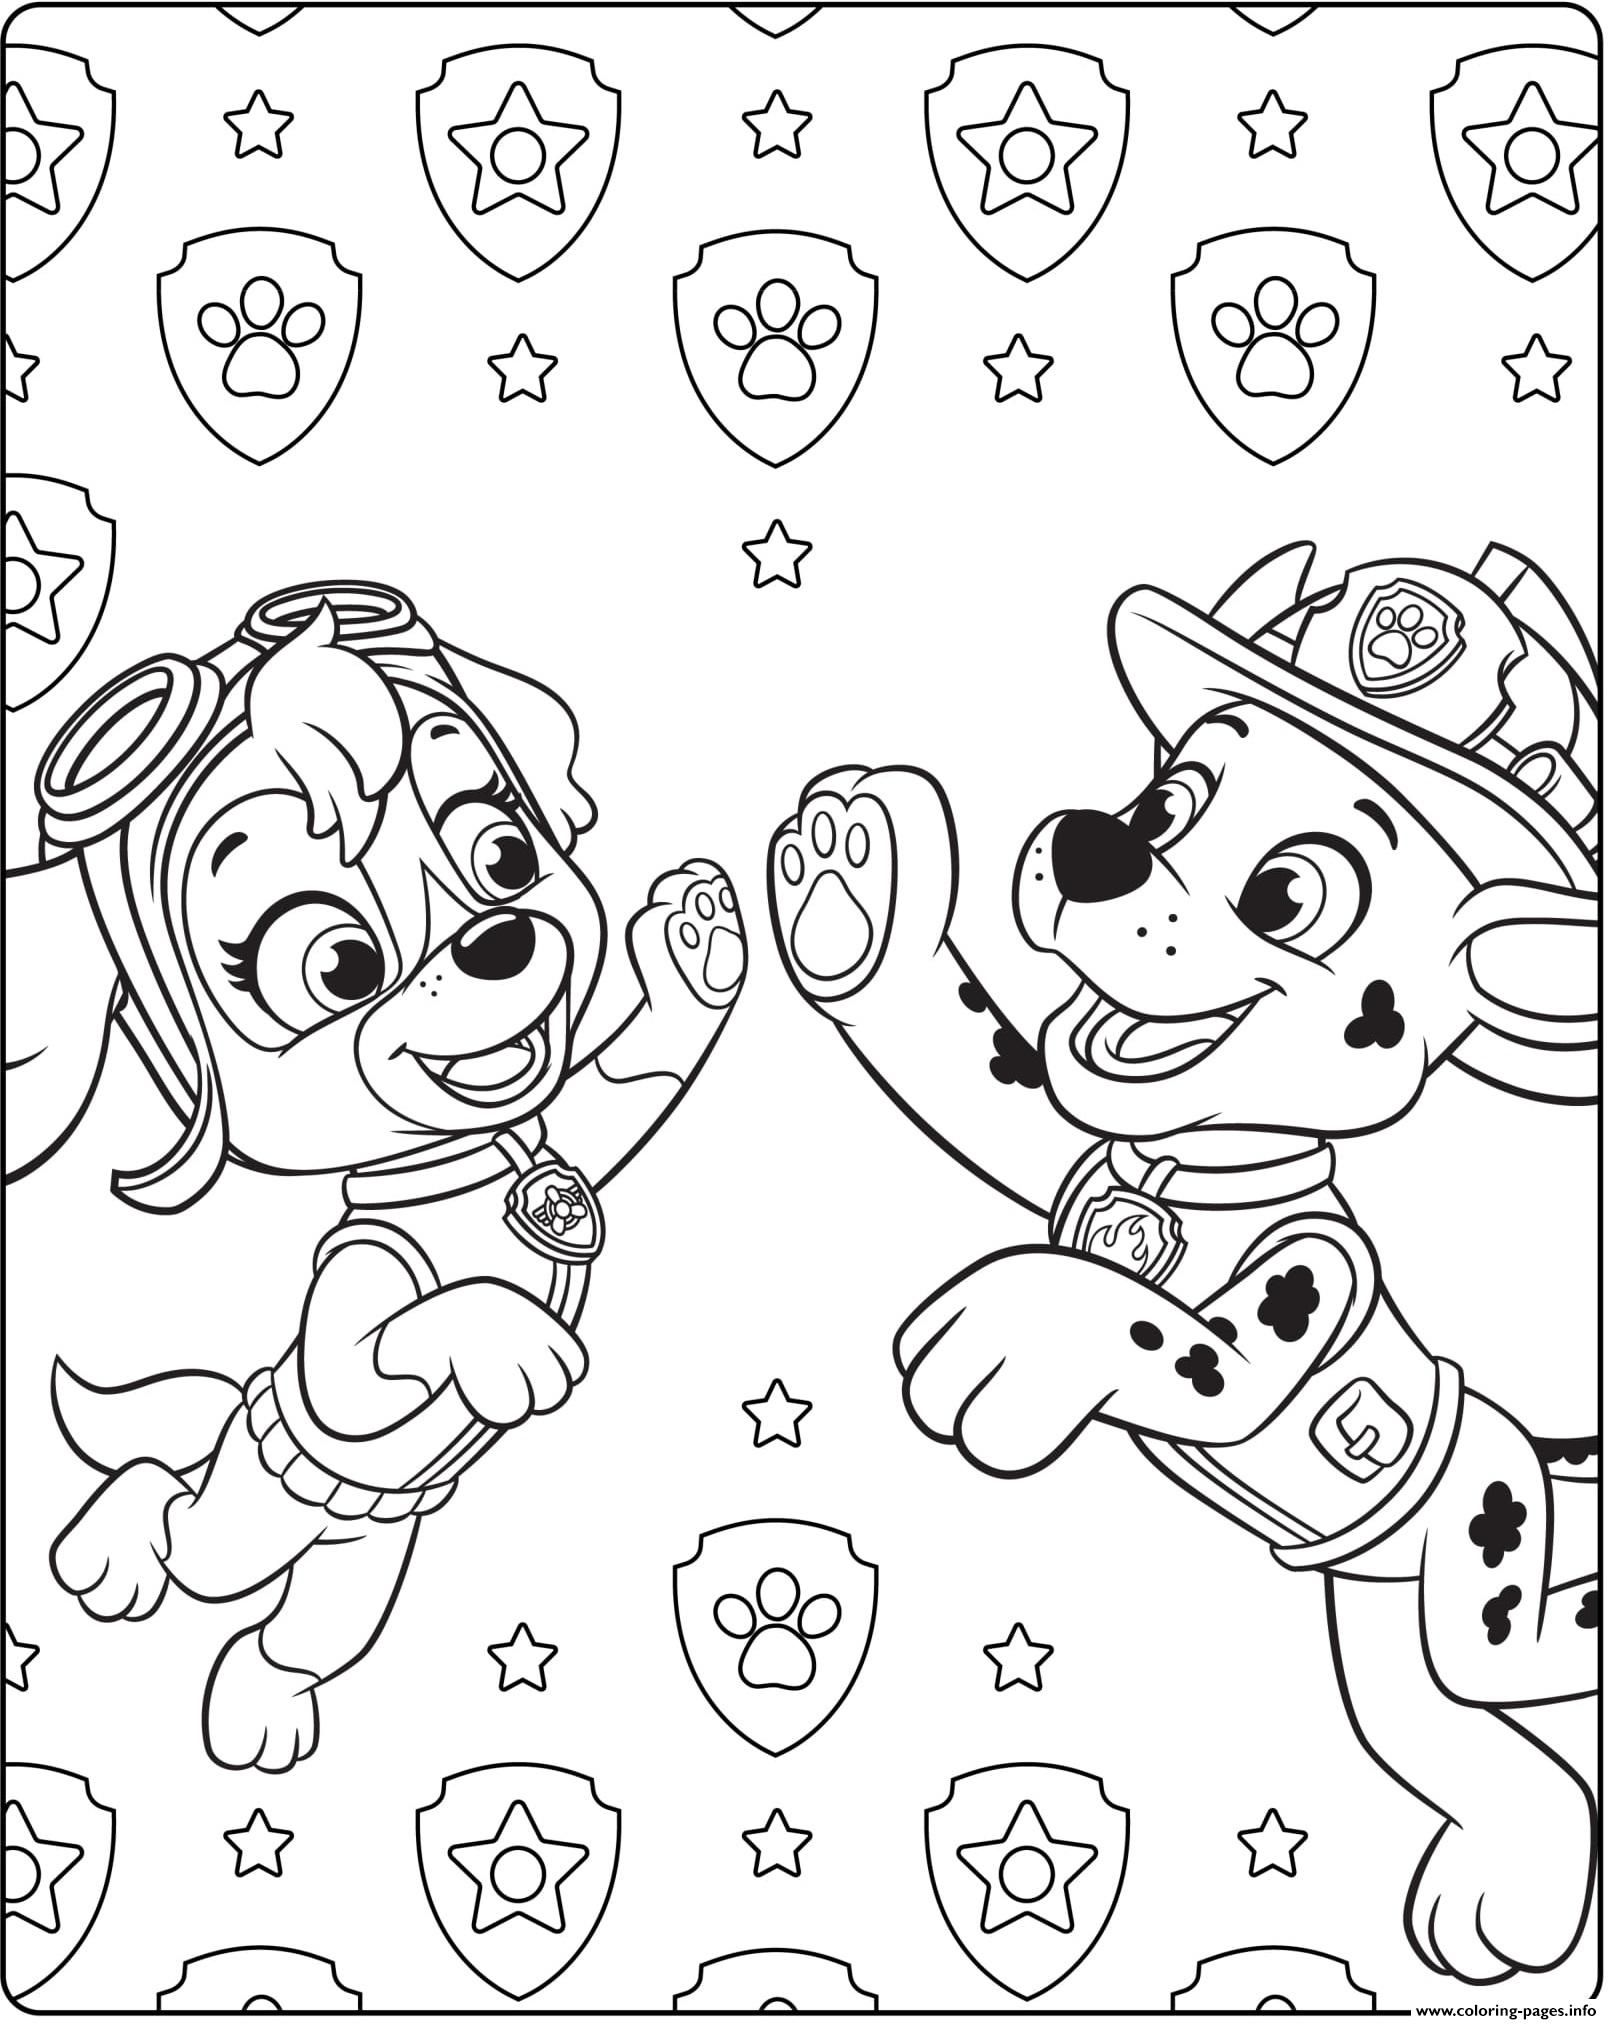 Coloring Pages : Pin By Julie Brossard On Crafts Paw Patrol ...